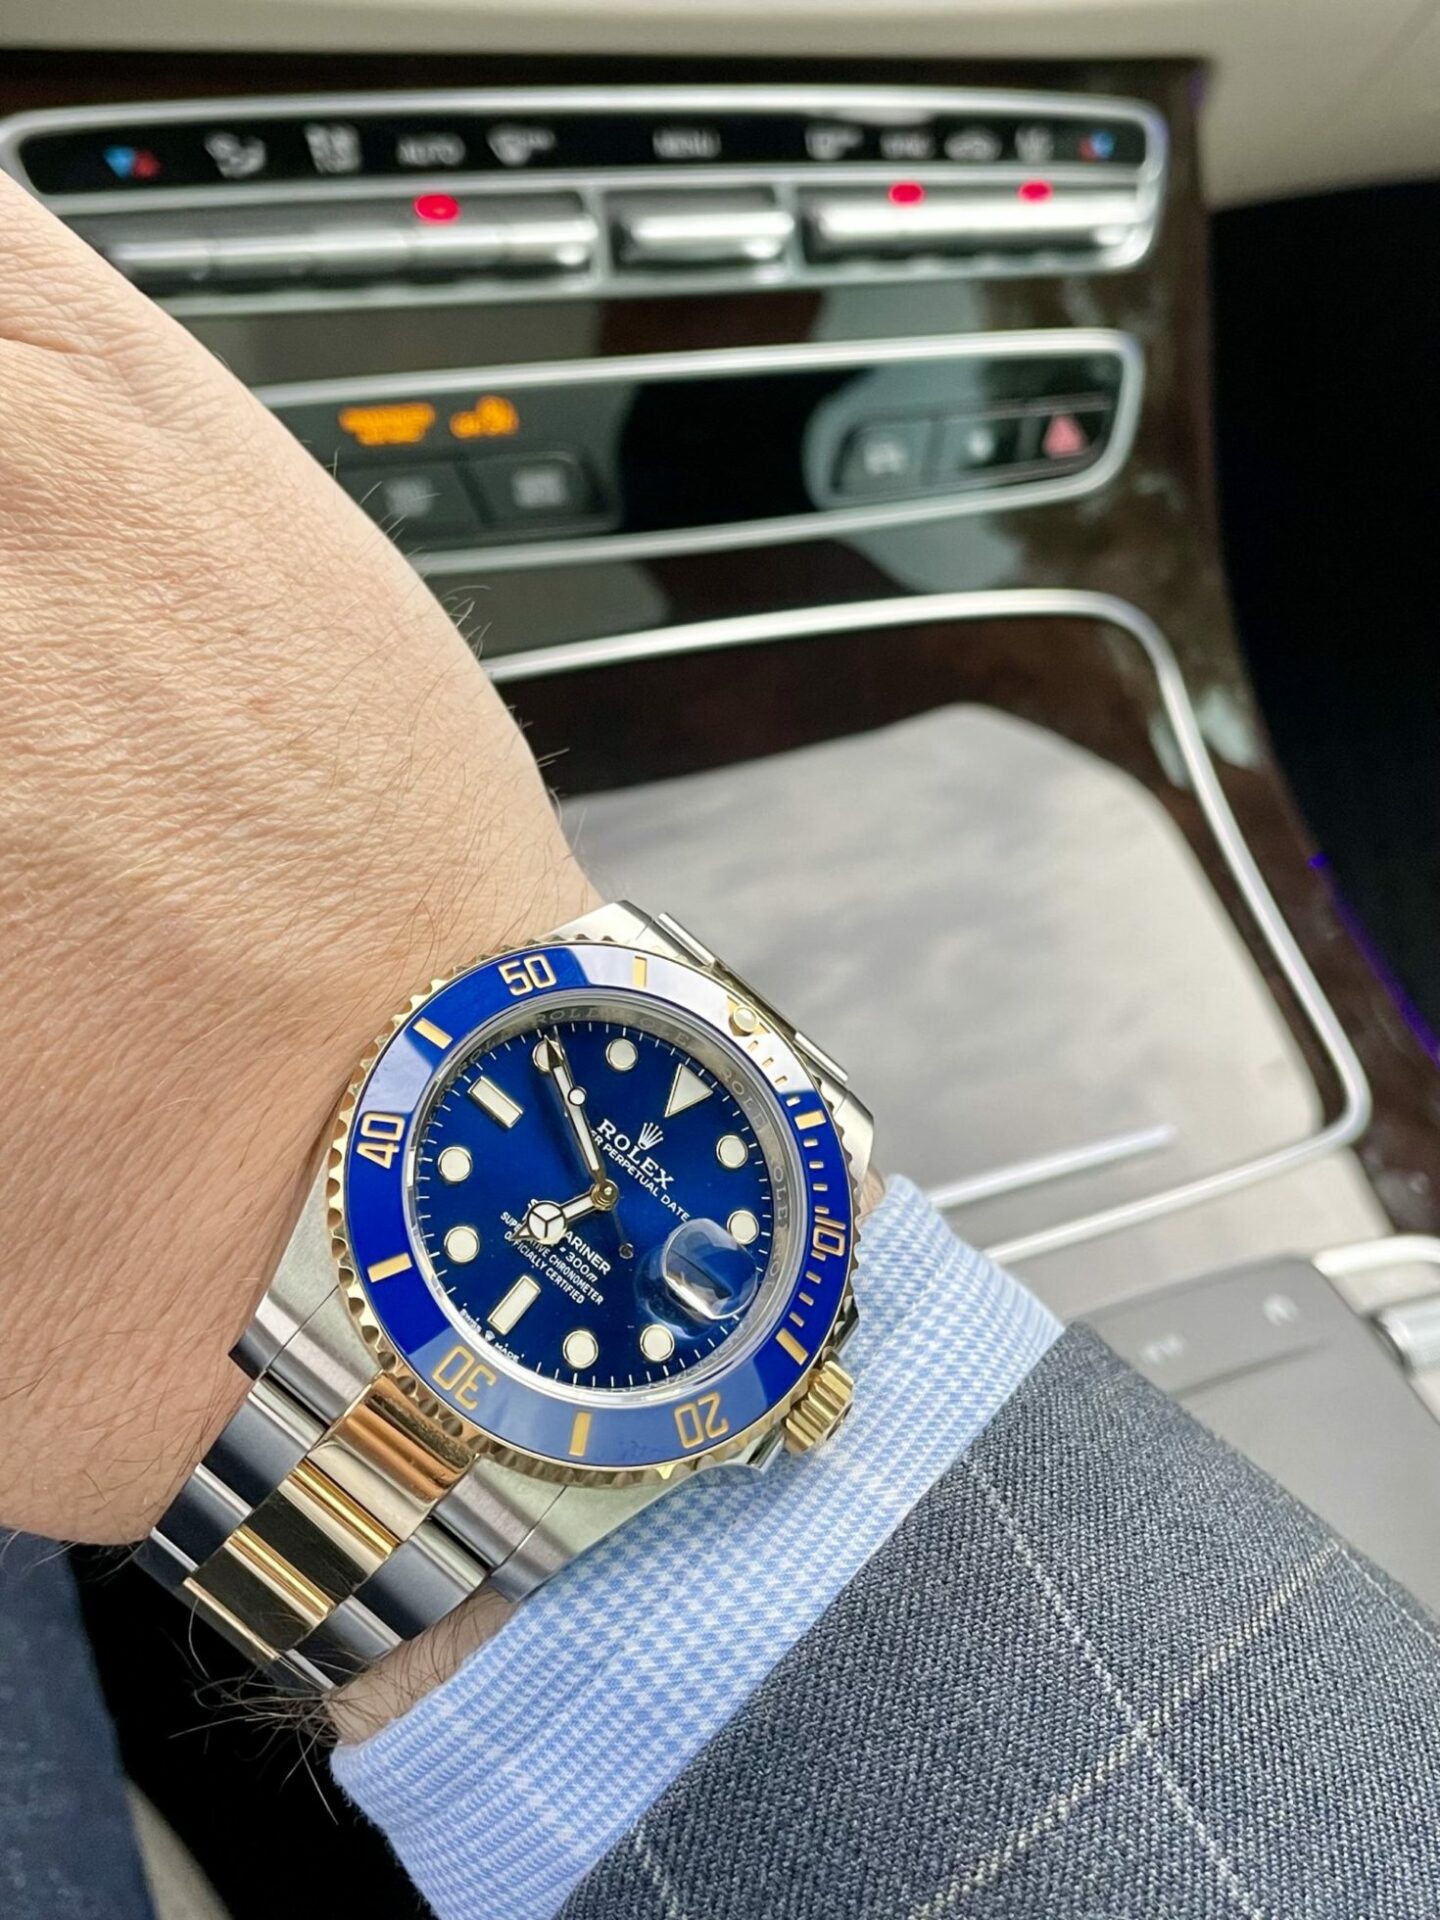 Rolex Submariner Blue Dial Gold and Steel Watch